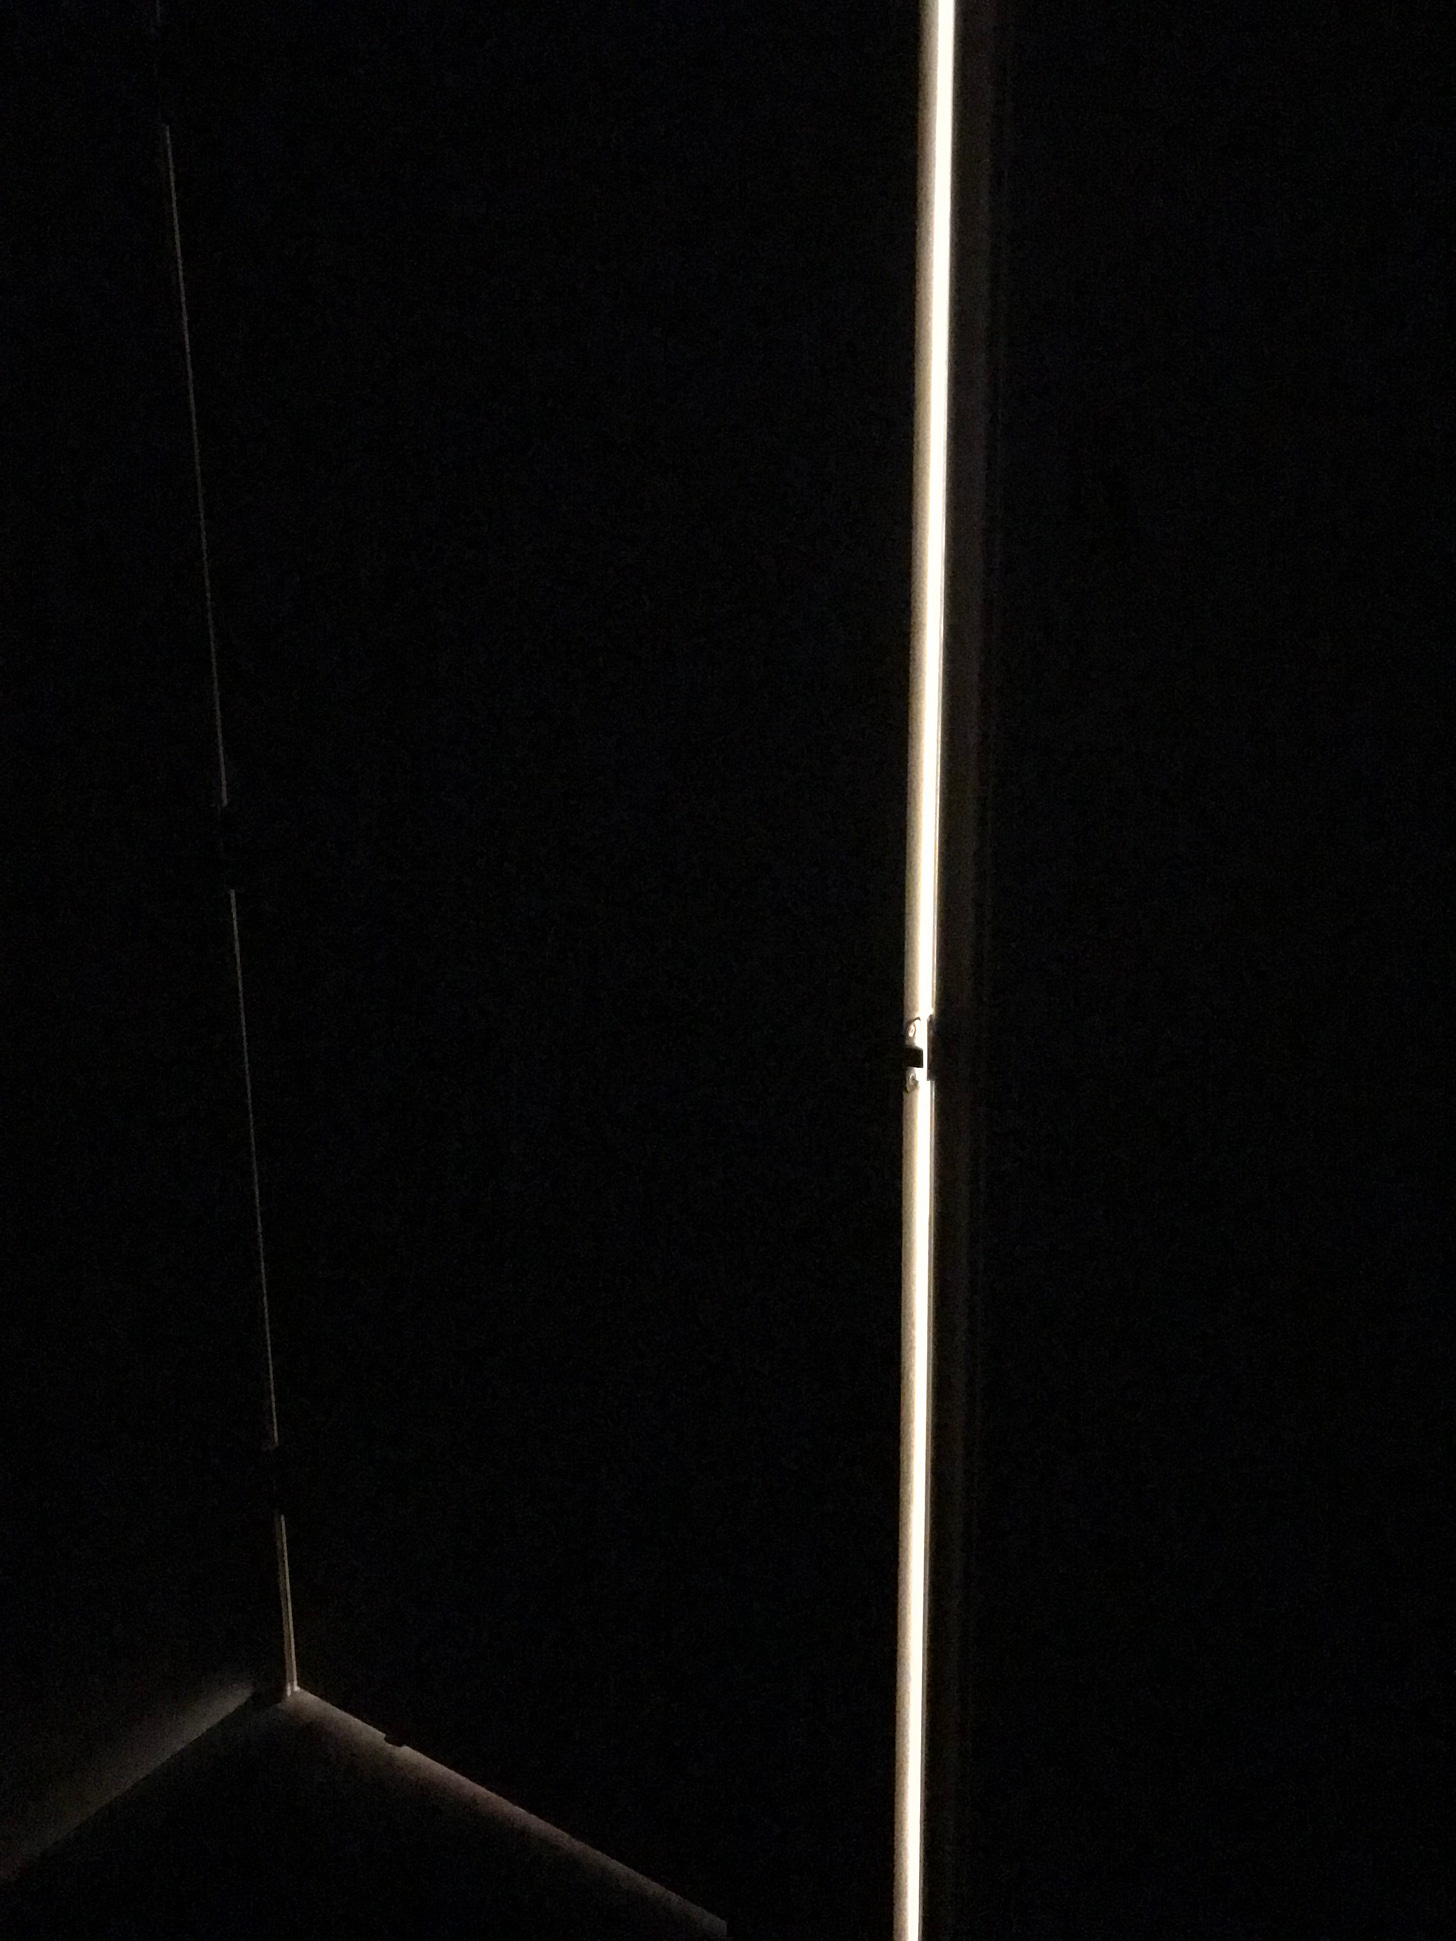 A dark room holds the faint outline of a cracked door. A think vertical line of light shine through.